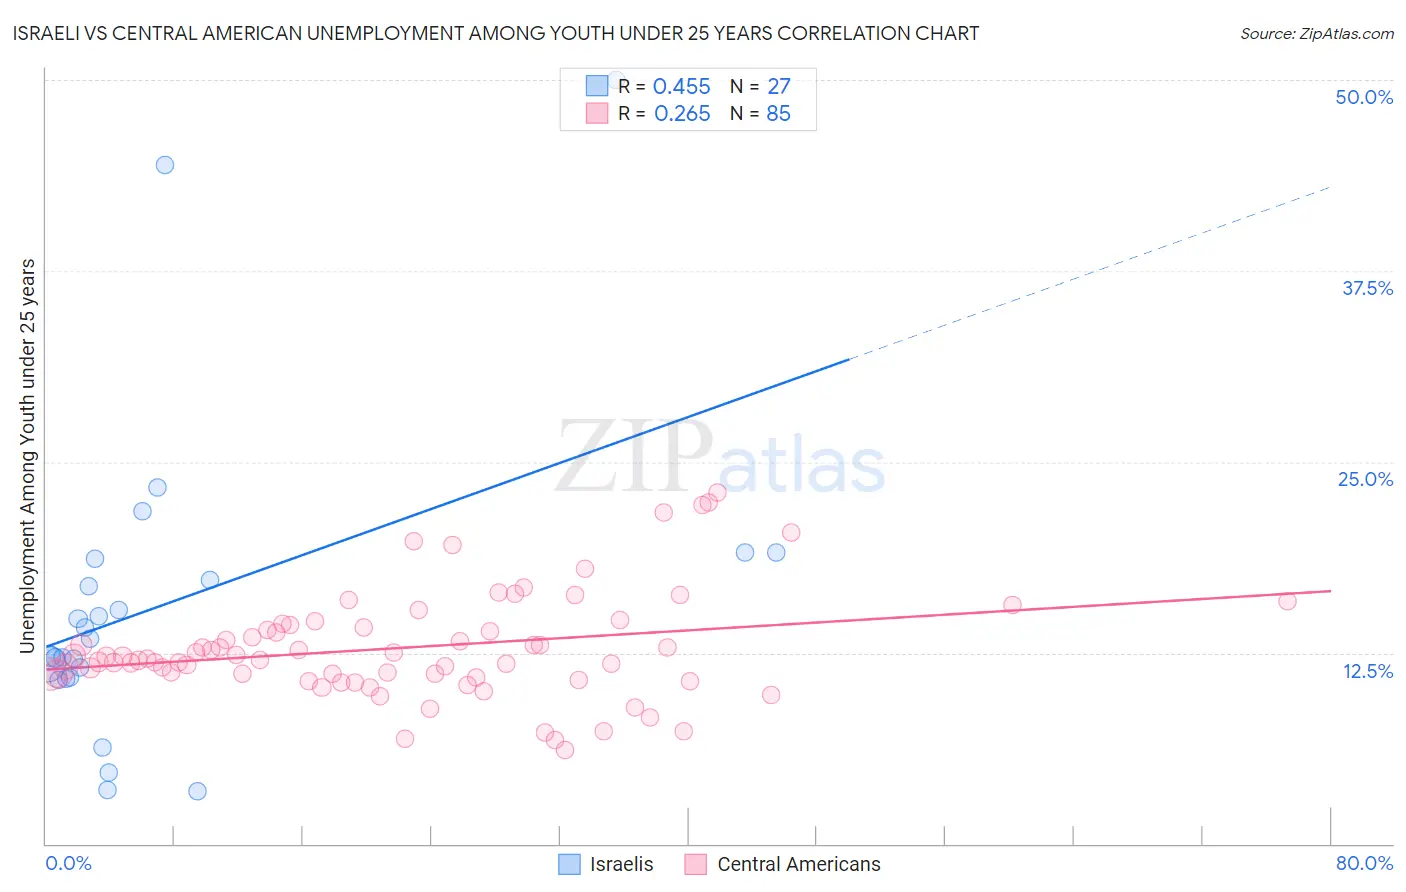 Israeli vs Central American Unemployment Among Youth under 25 years